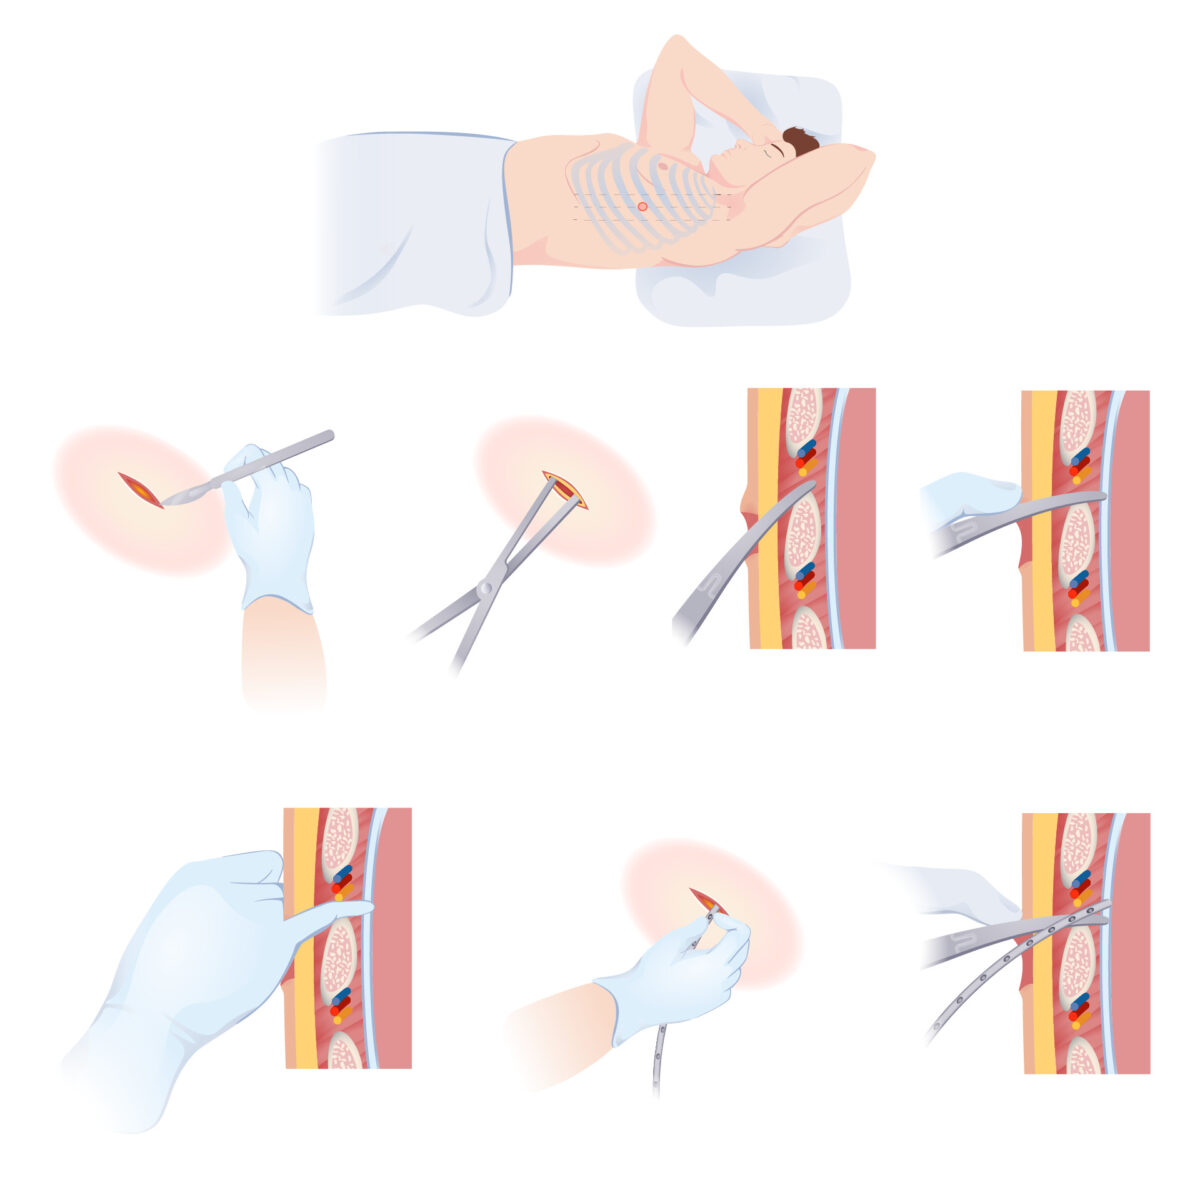 Insertion of a chest tube - thoracostomy